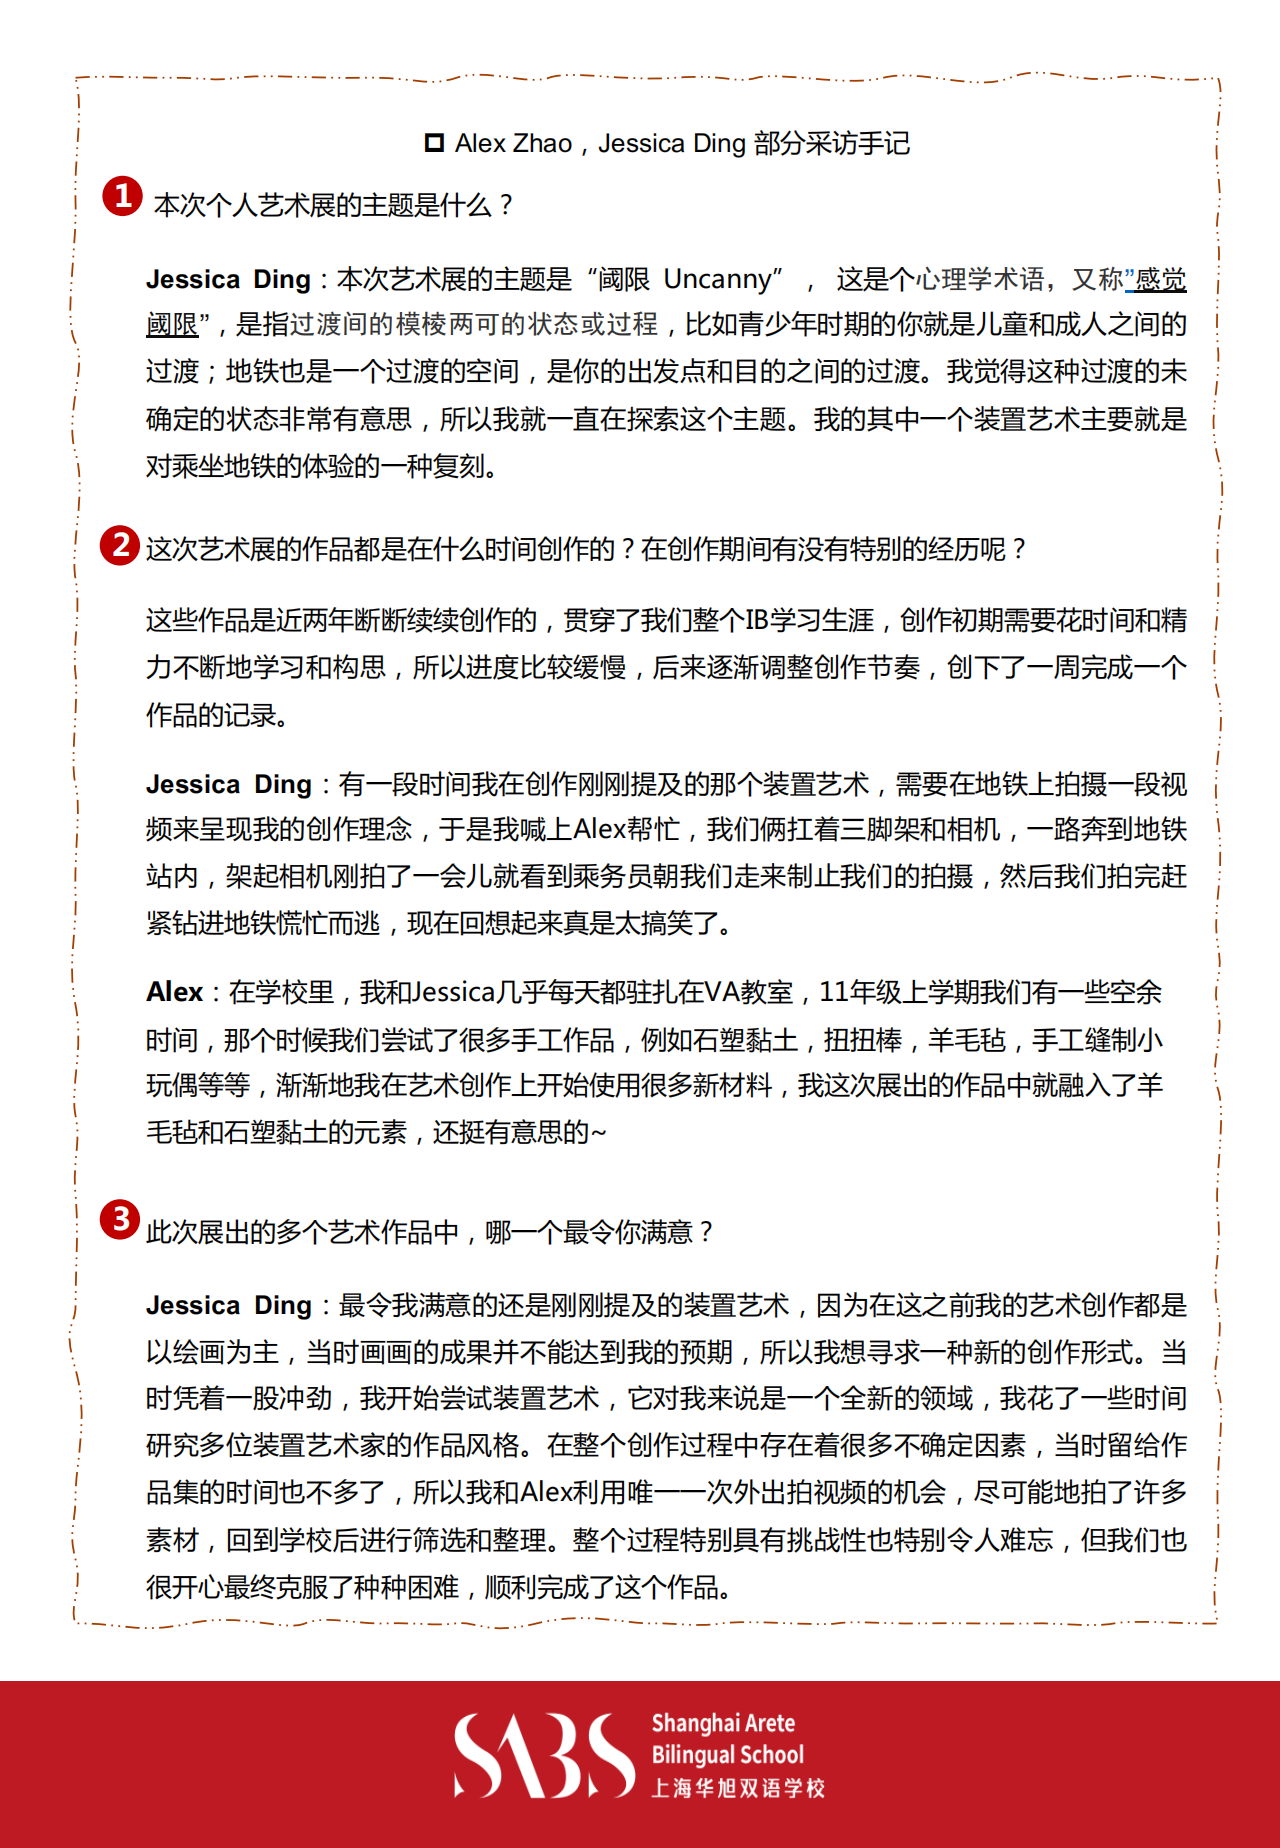 HS 2nd Issue Newsletter pptx（中文）_18.png